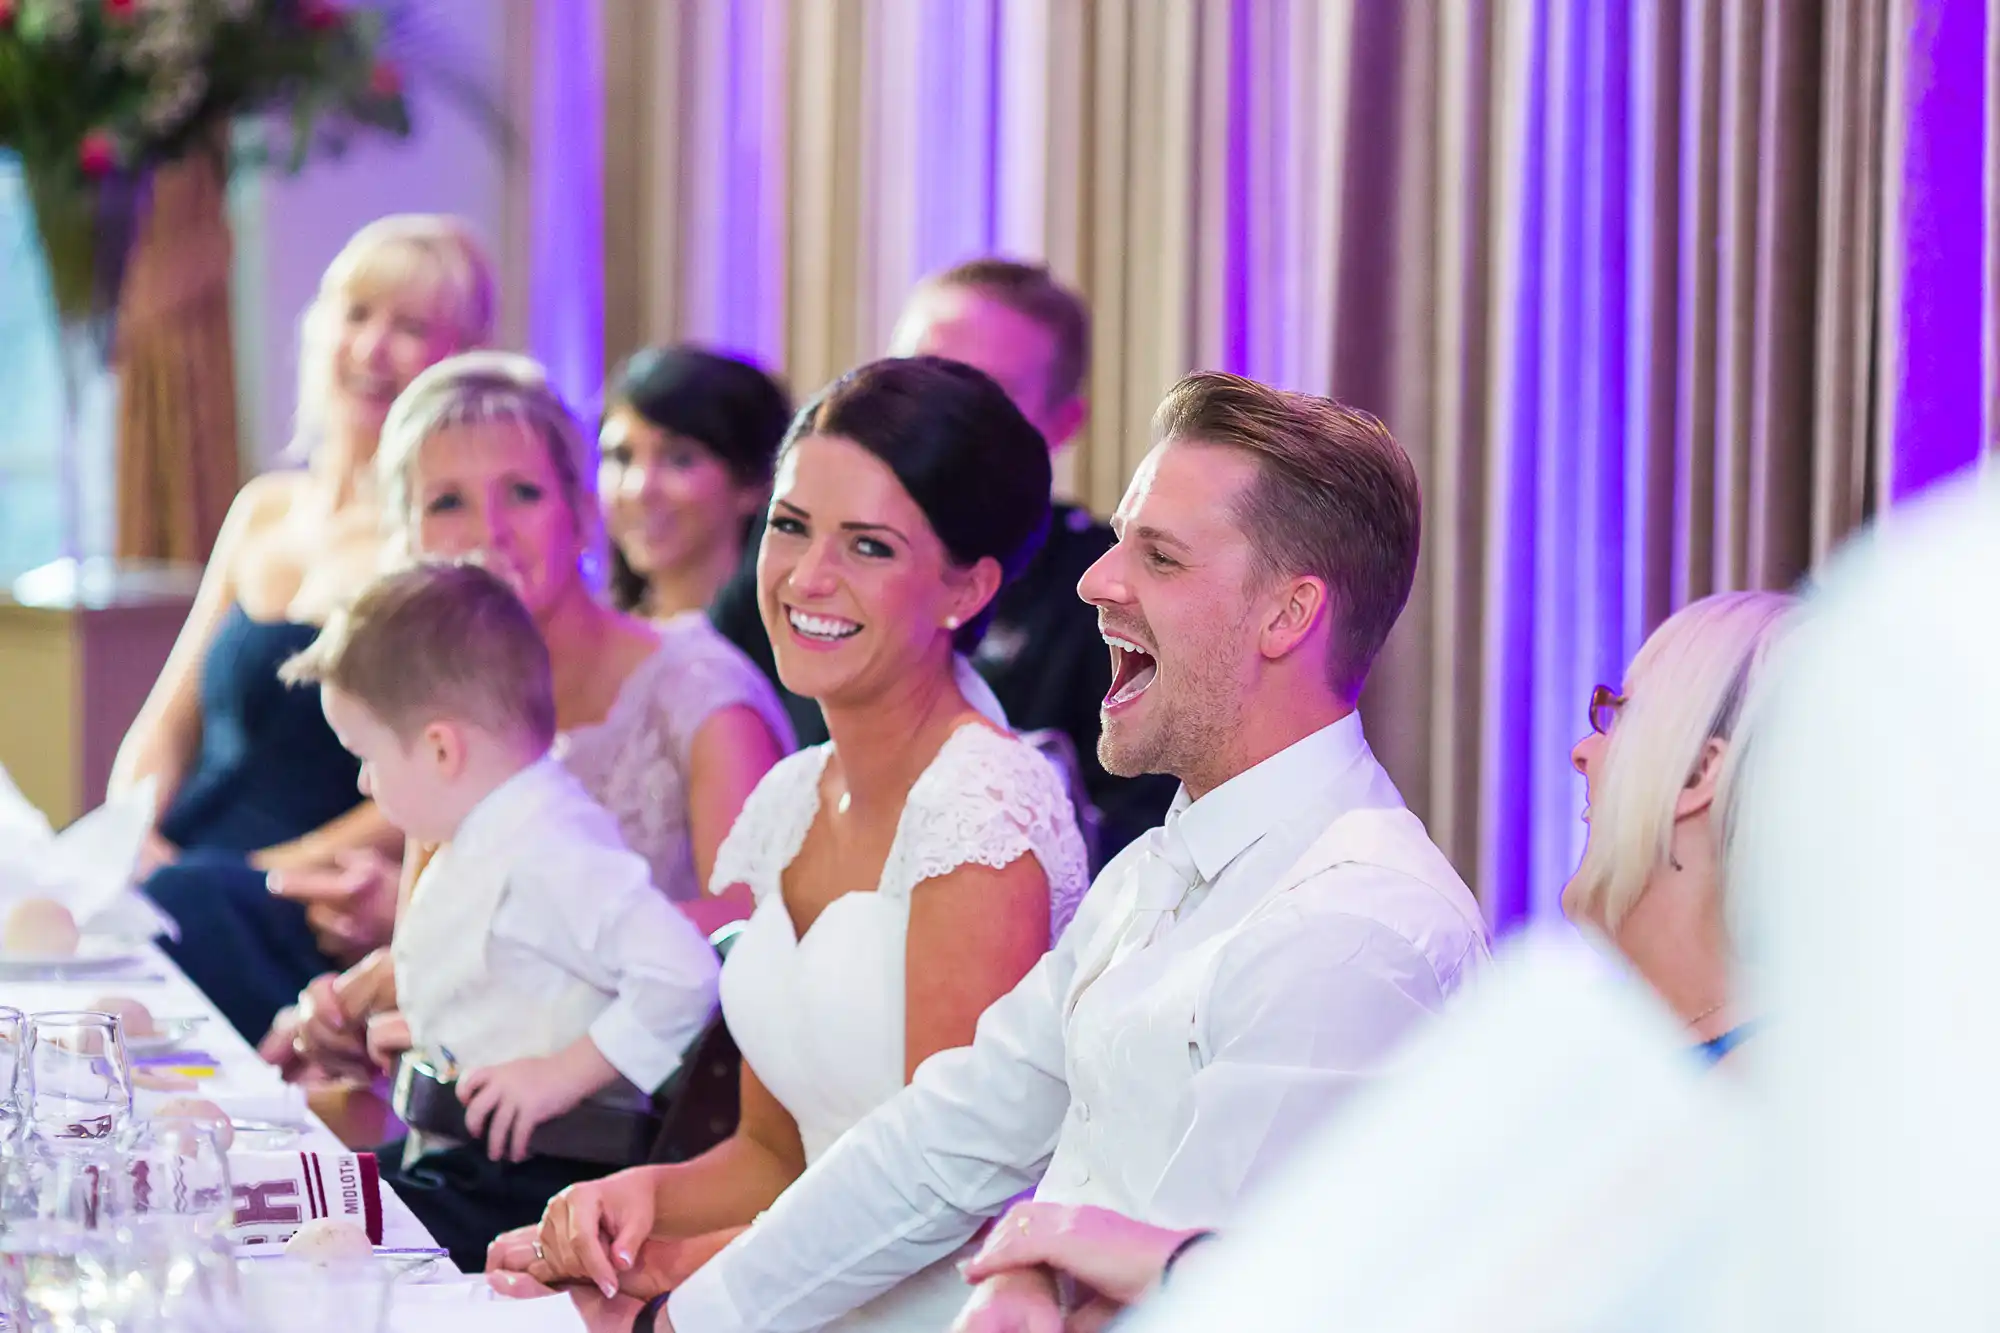 A bride and groom laughing joyously at a wedding reception table, surrounded by guests in a festively lit venue.